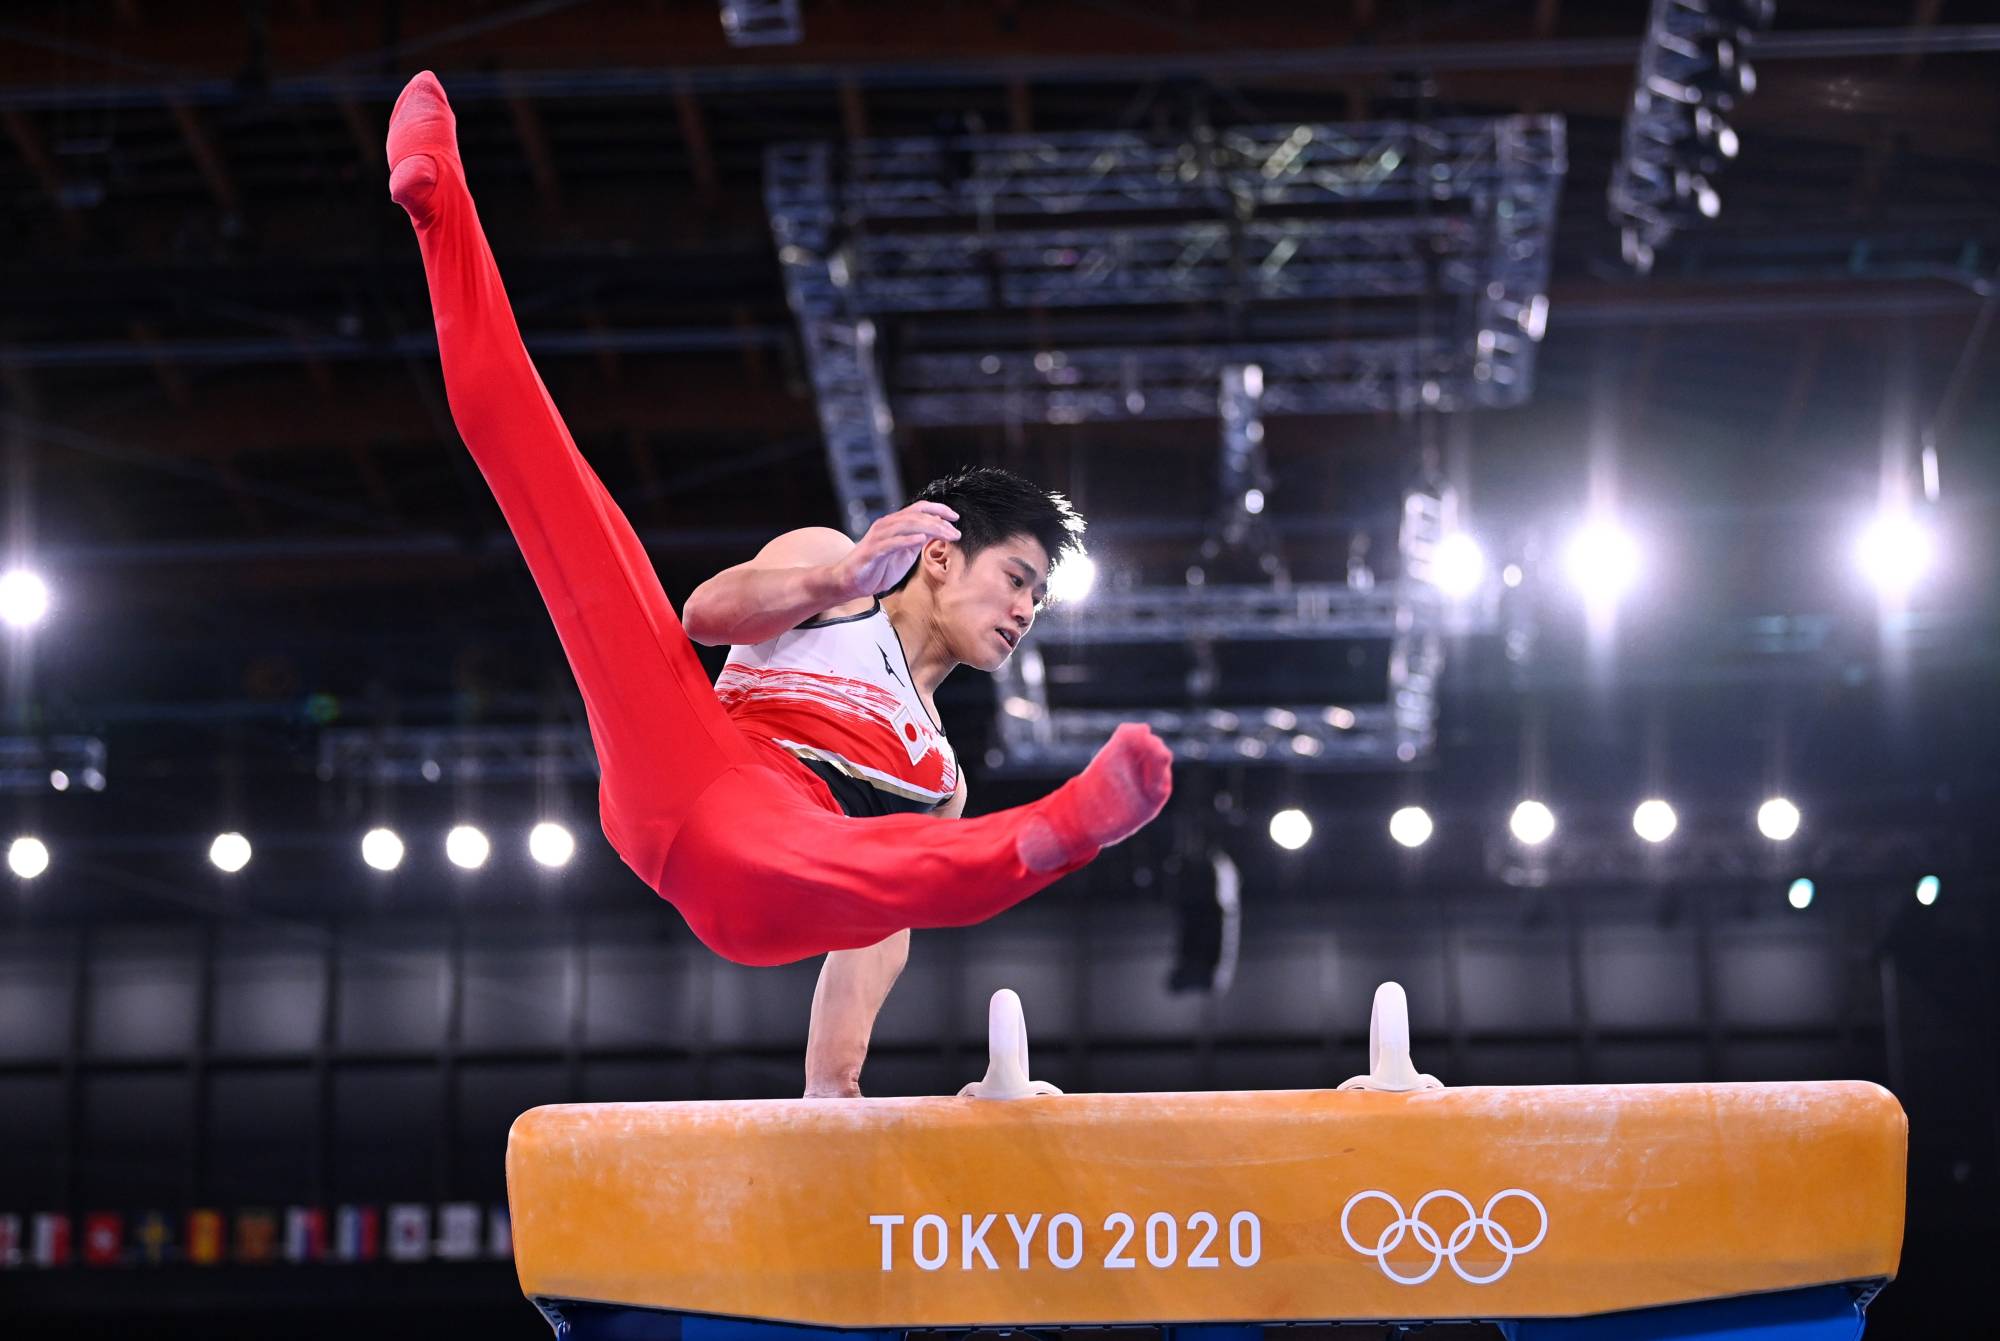 Japanese men grab silver in gymnastics team competition - The